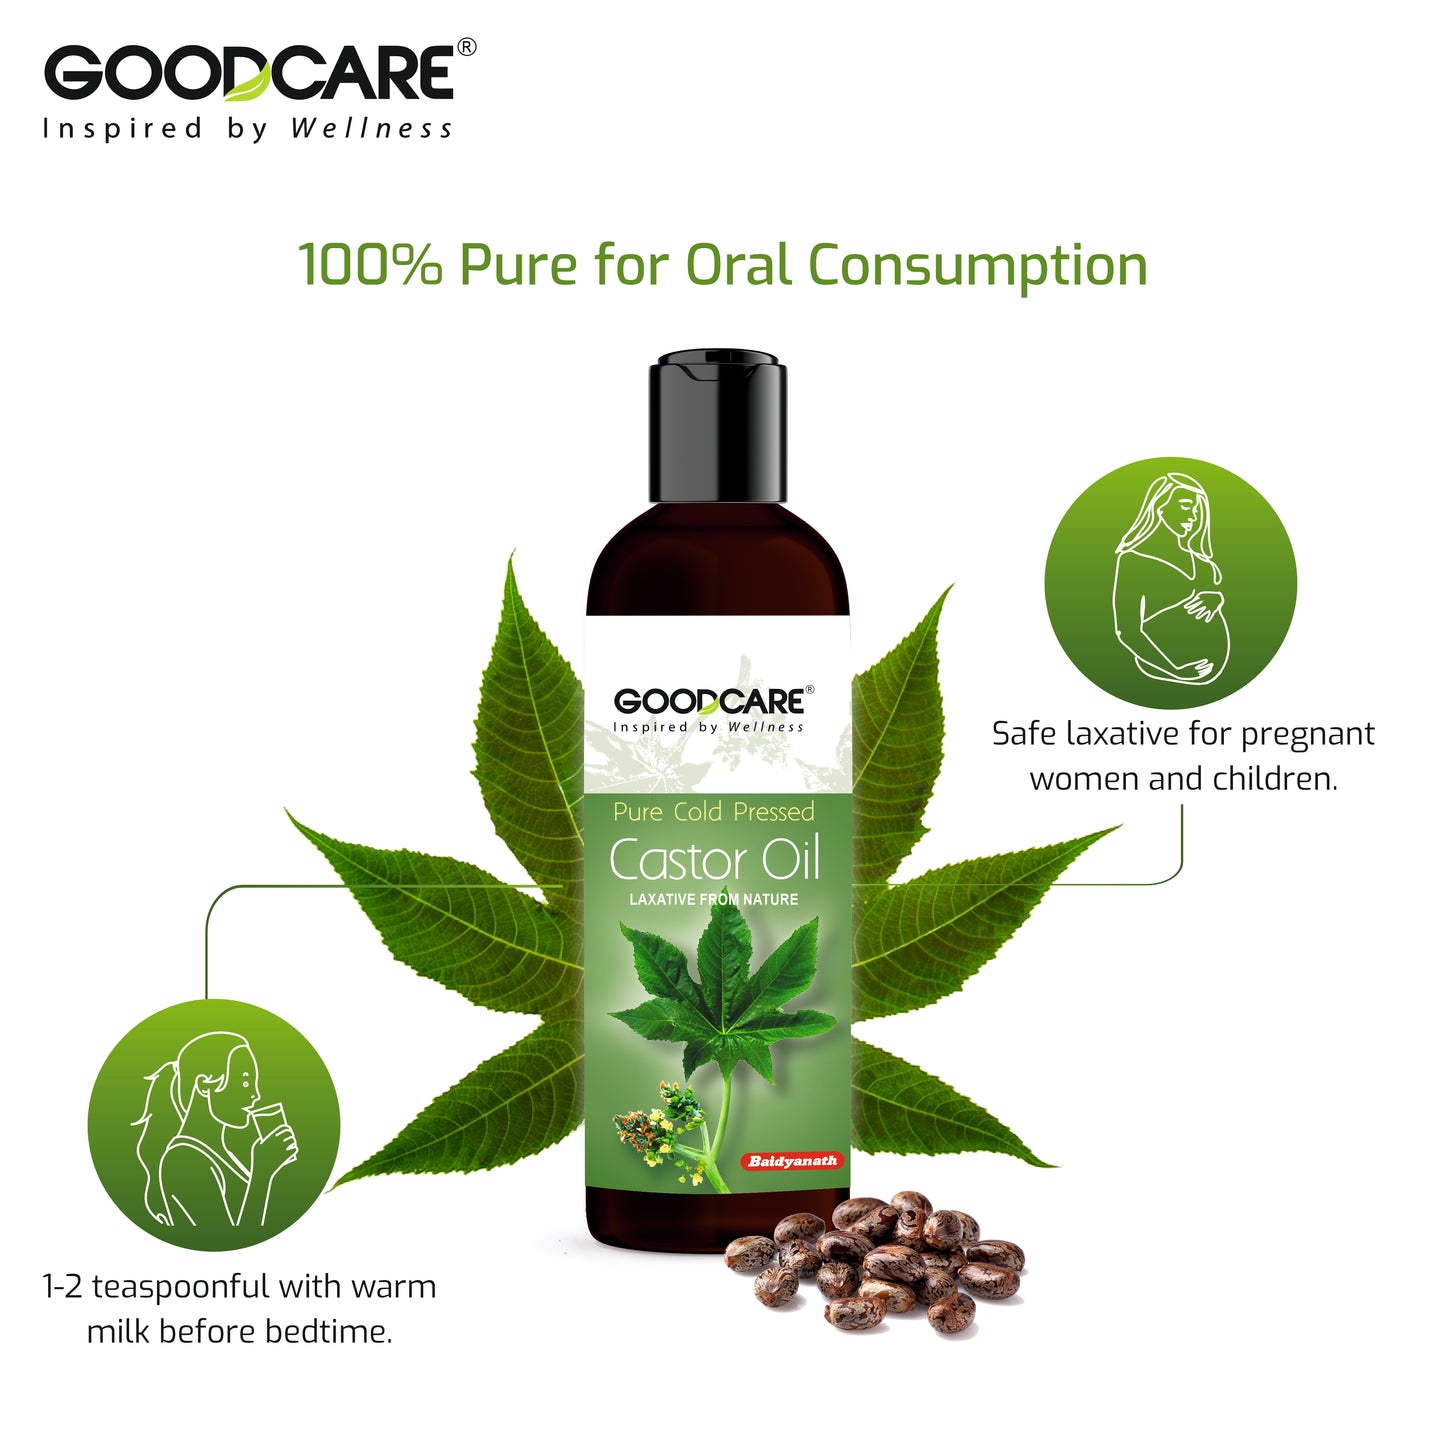 GOODCARE 100% Pure & Natural Premium Cold Pressed Castor Oil for Hair & Skin - Removes pimples, acne and heals fungal infection